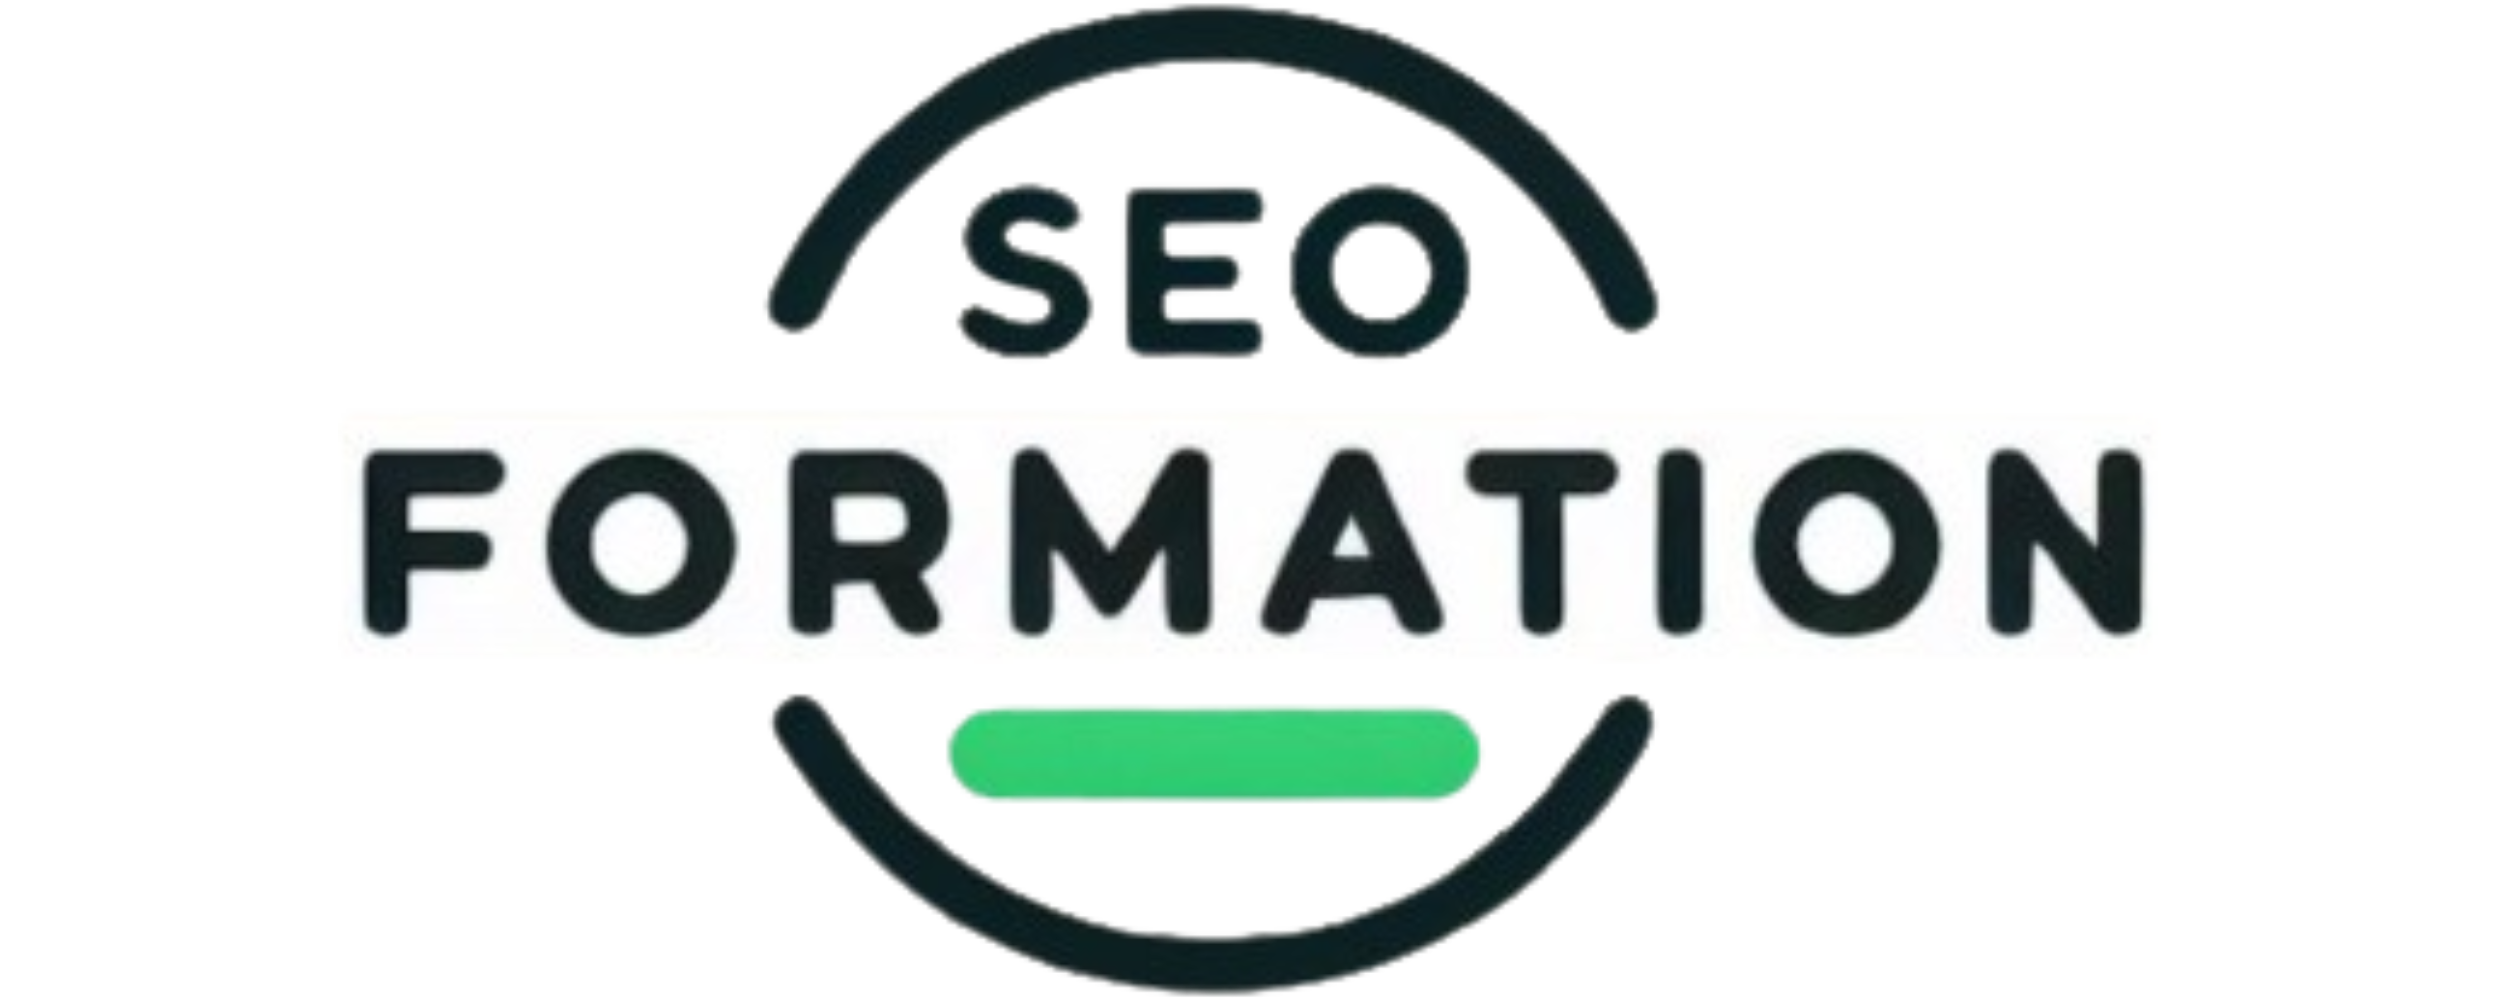 SEO FORMATION